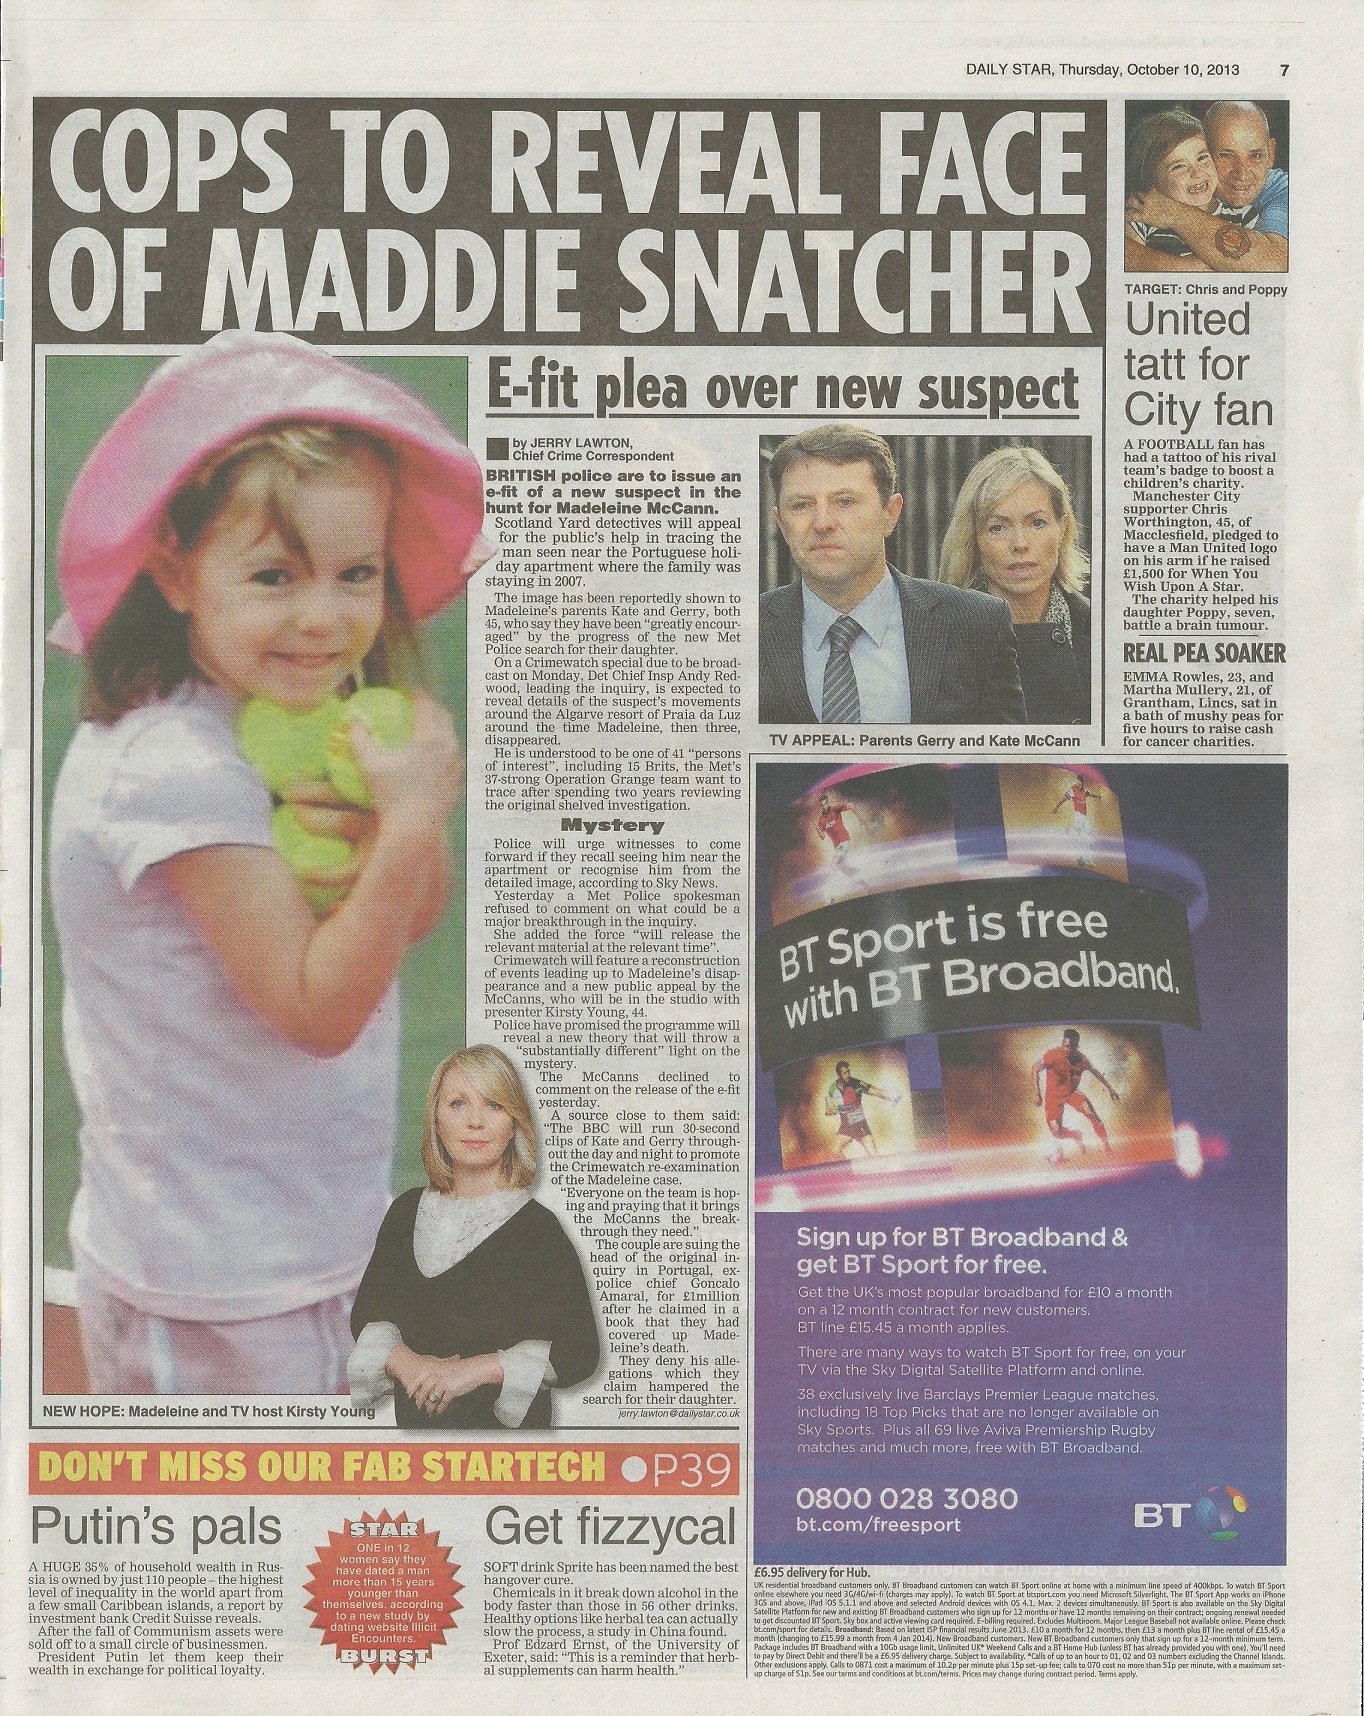 Daily Star, paper edition: 'Cops to reveal face of Maddie snatcher', 10 October 2013